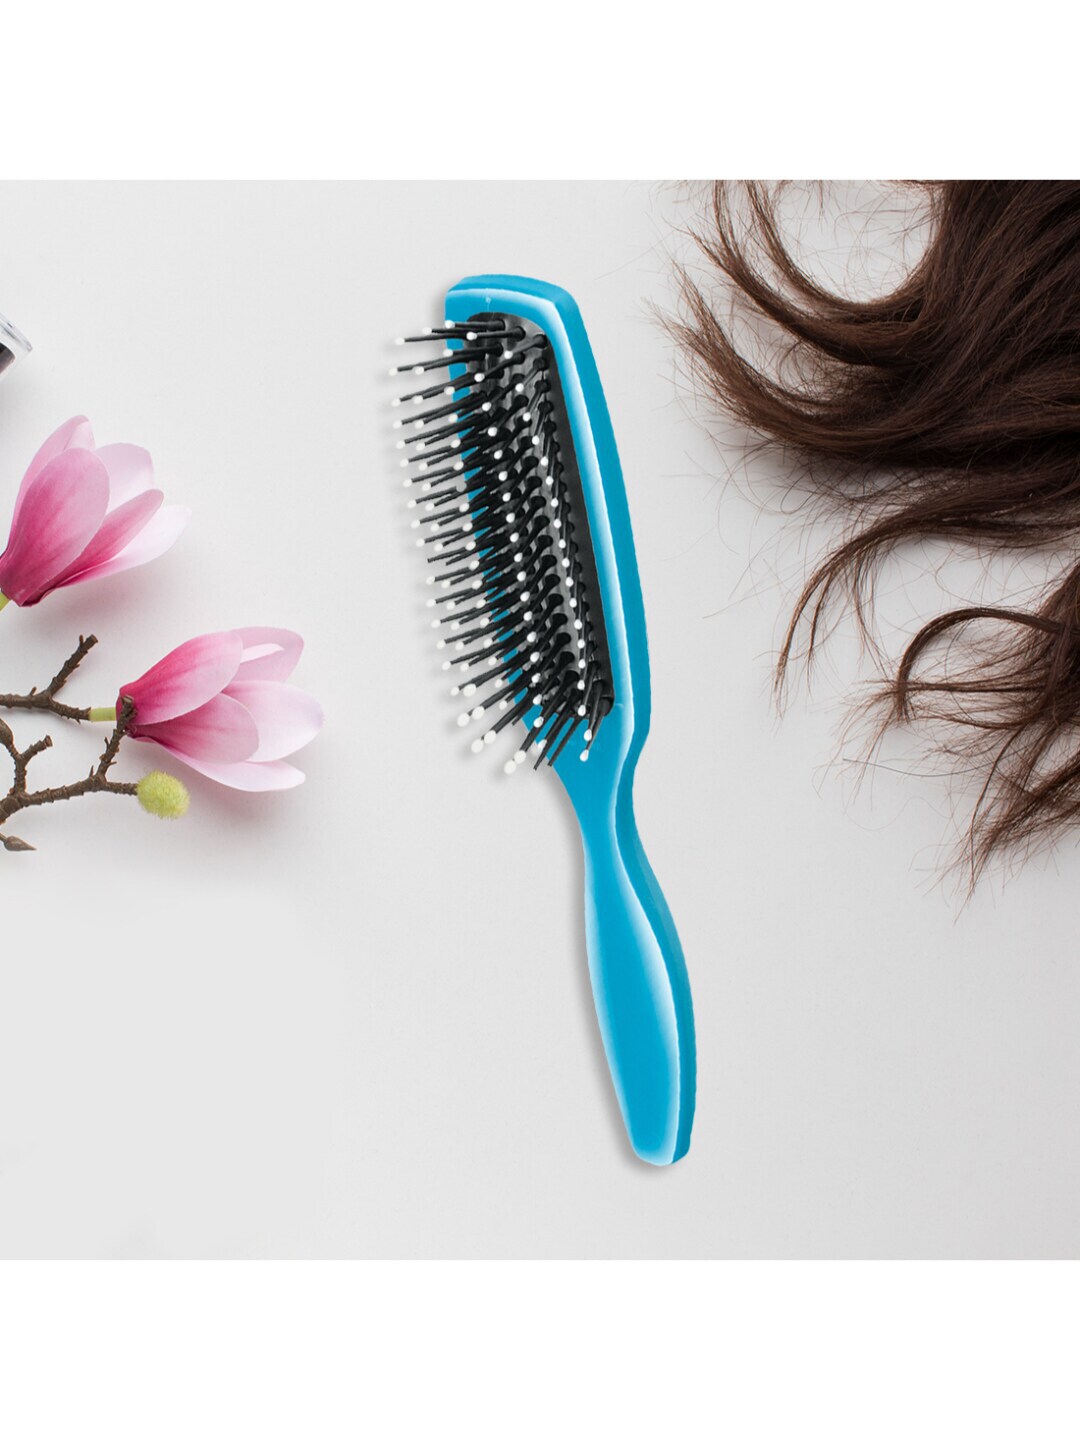 Trisa Turquoise Blue & Black Hair Brush with Super Soft Bristles for Styling - 657735 Price in India